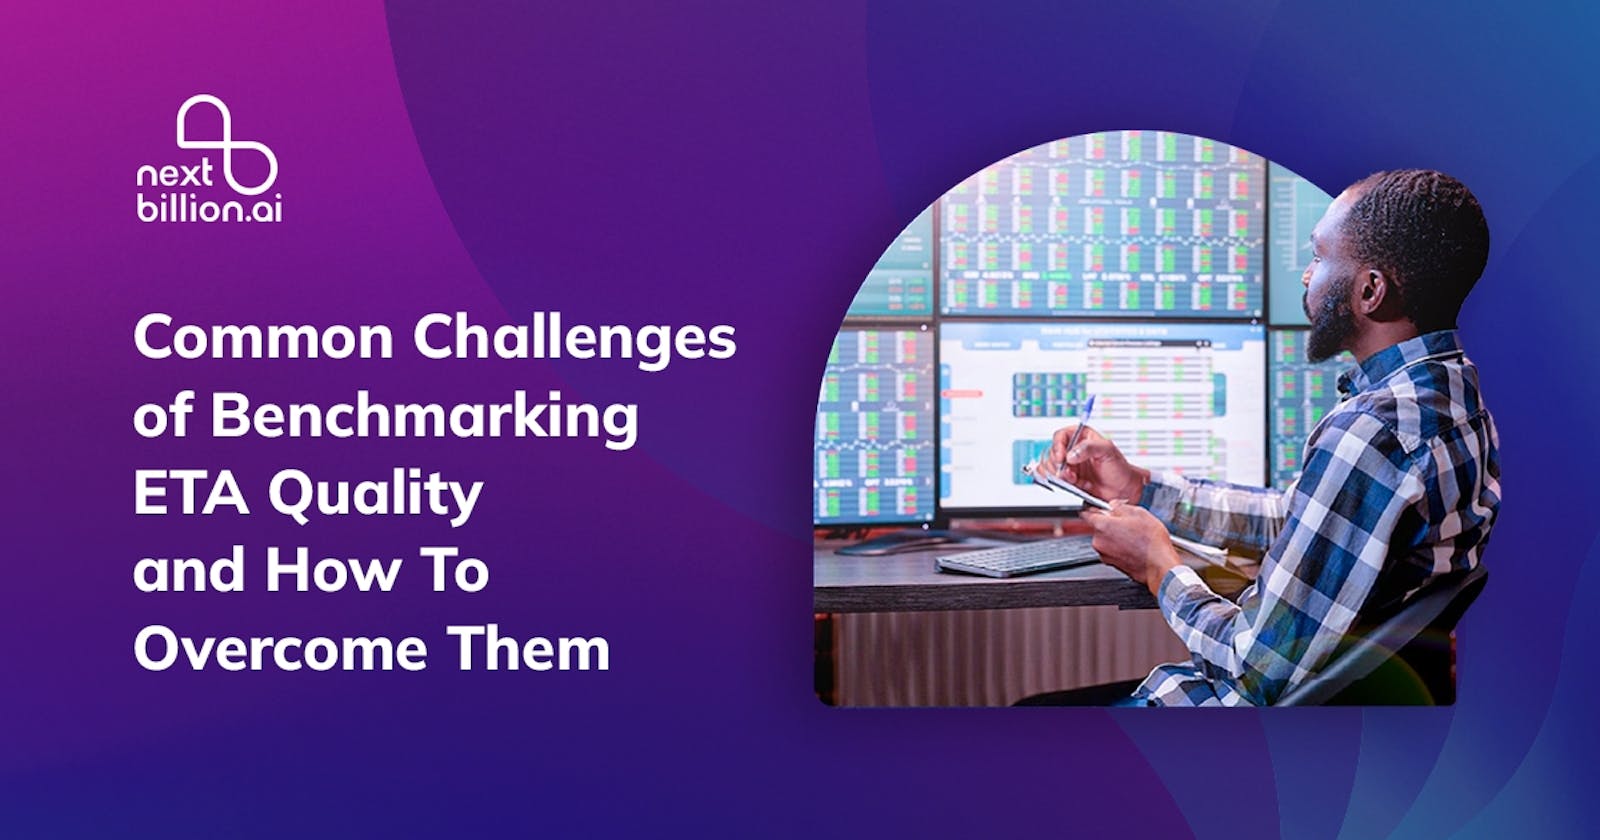 Common Challenges of Benchmarking ETA Quality and How To Overcome Them